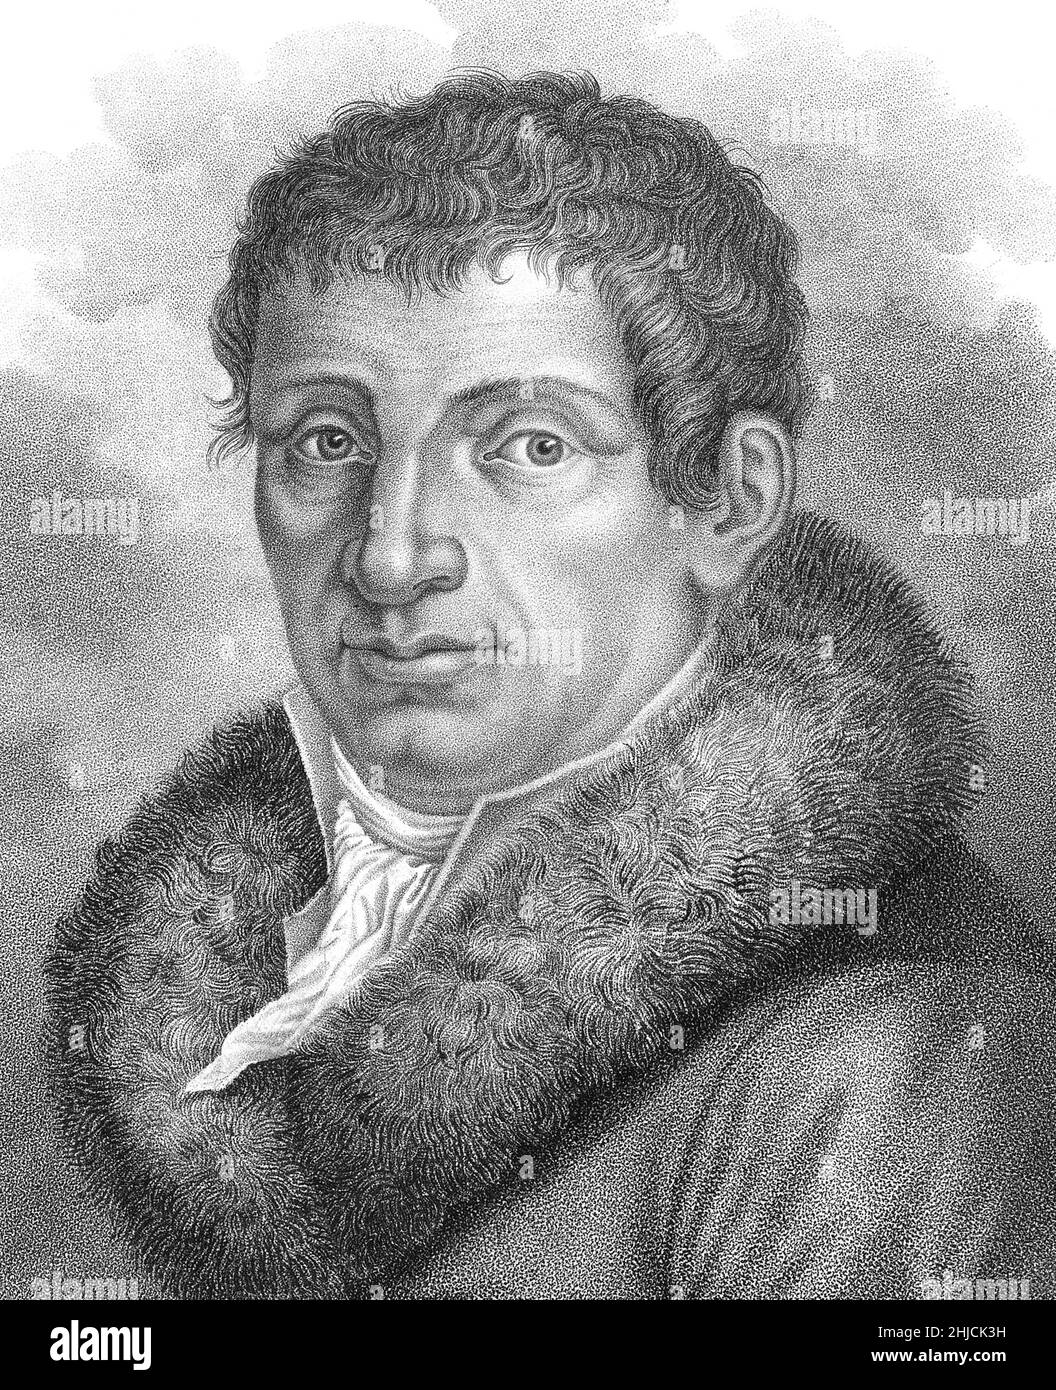 Joseph-Louis Lagrange (1736-1813), also known as Giuseppe Luigi Lagrangia, Italian-French mathematician and astronomer who made significant contributions to the fields of analysis, number theory, and both classical and celestial mechanics. Stipple etching and engraving by Luigi Rados after a drawing by Roberto Focosi, circa 1827. Stock Photo